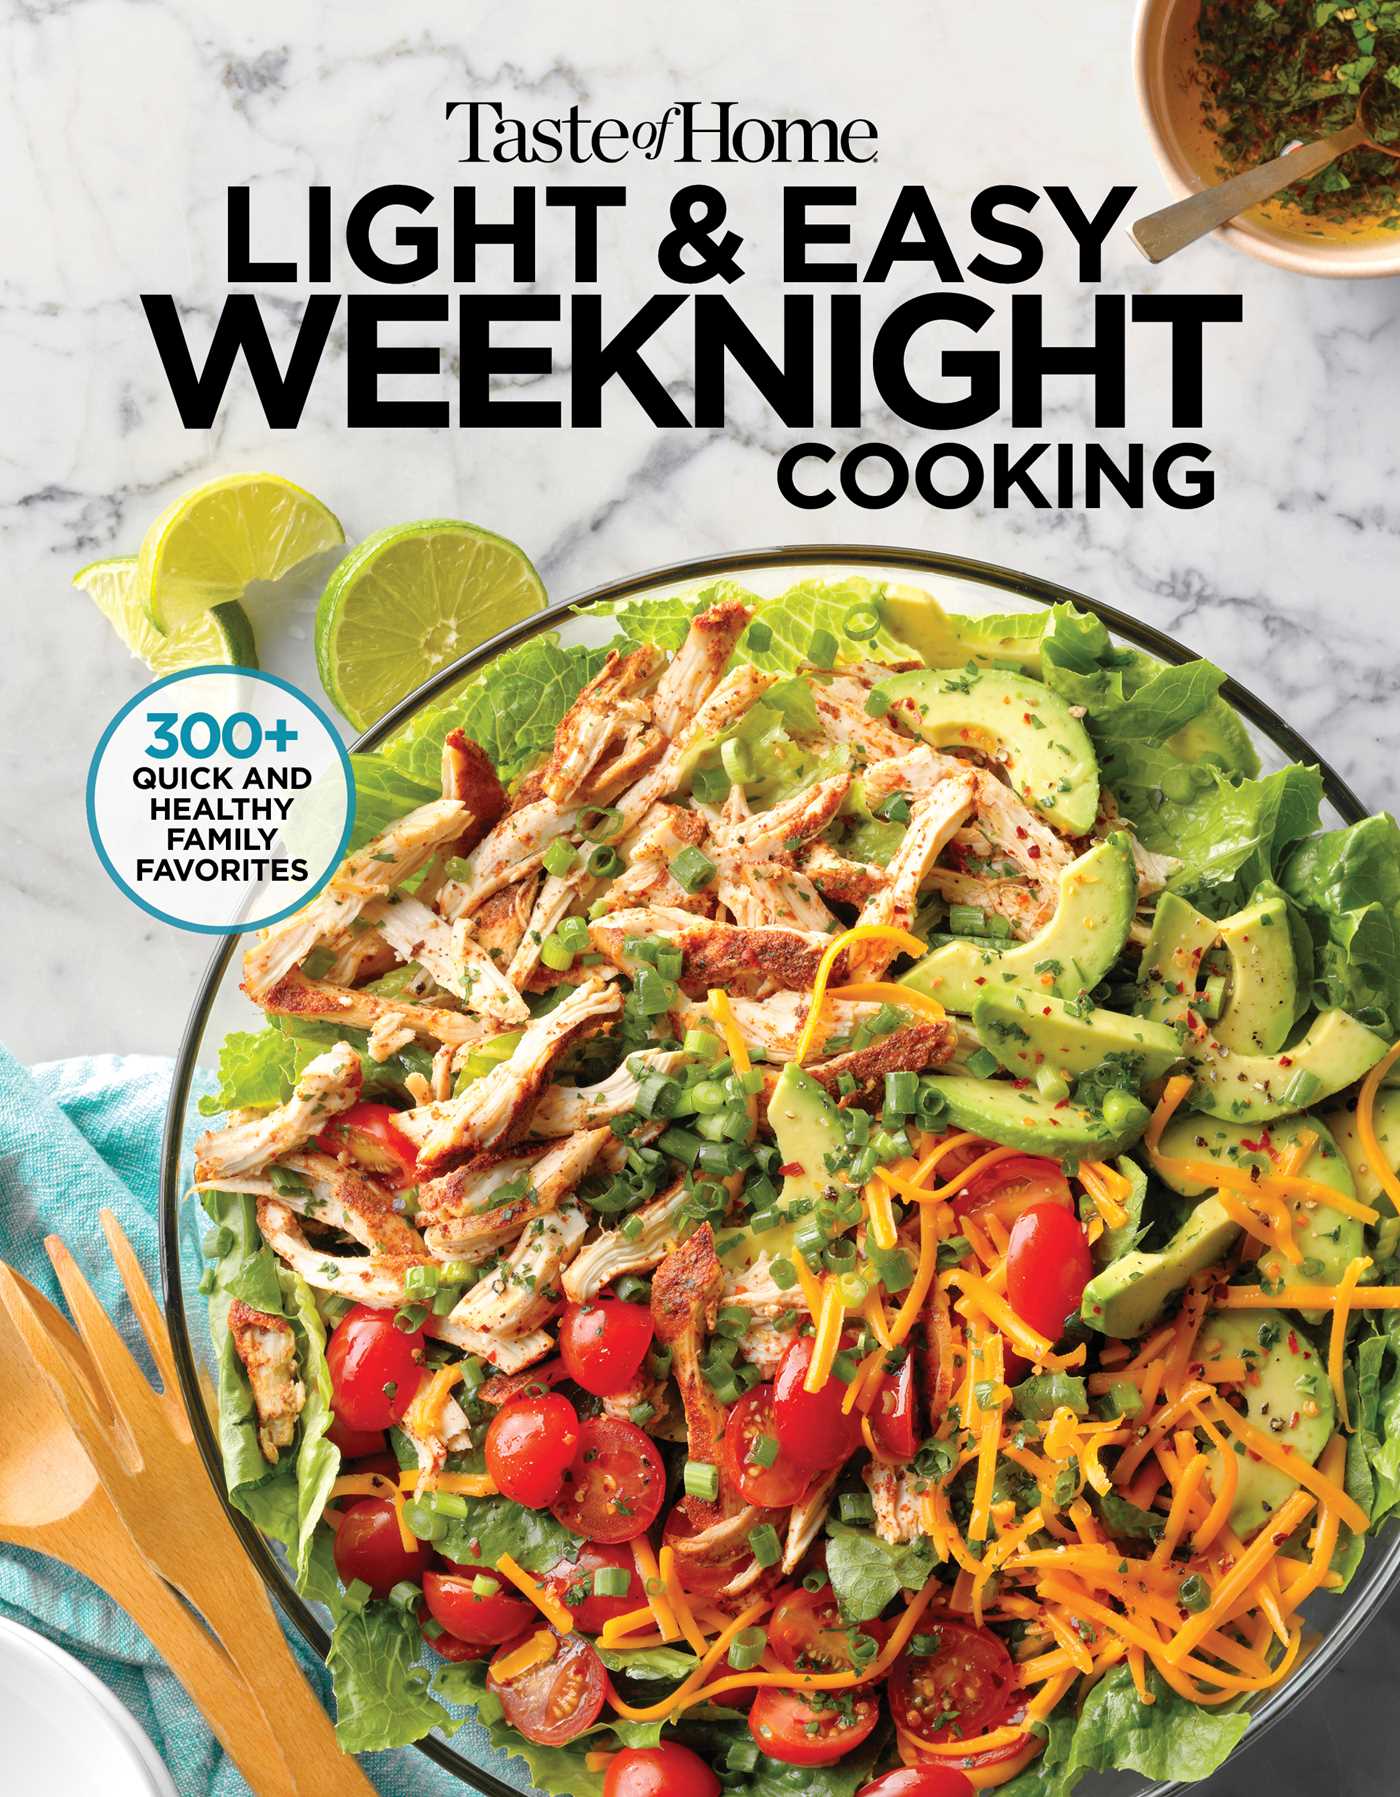 Taste of Home Light & Easy Weeknight Cooking : More than 300 simply satisfying dishes with fewer calories and less fat, salt & carbs